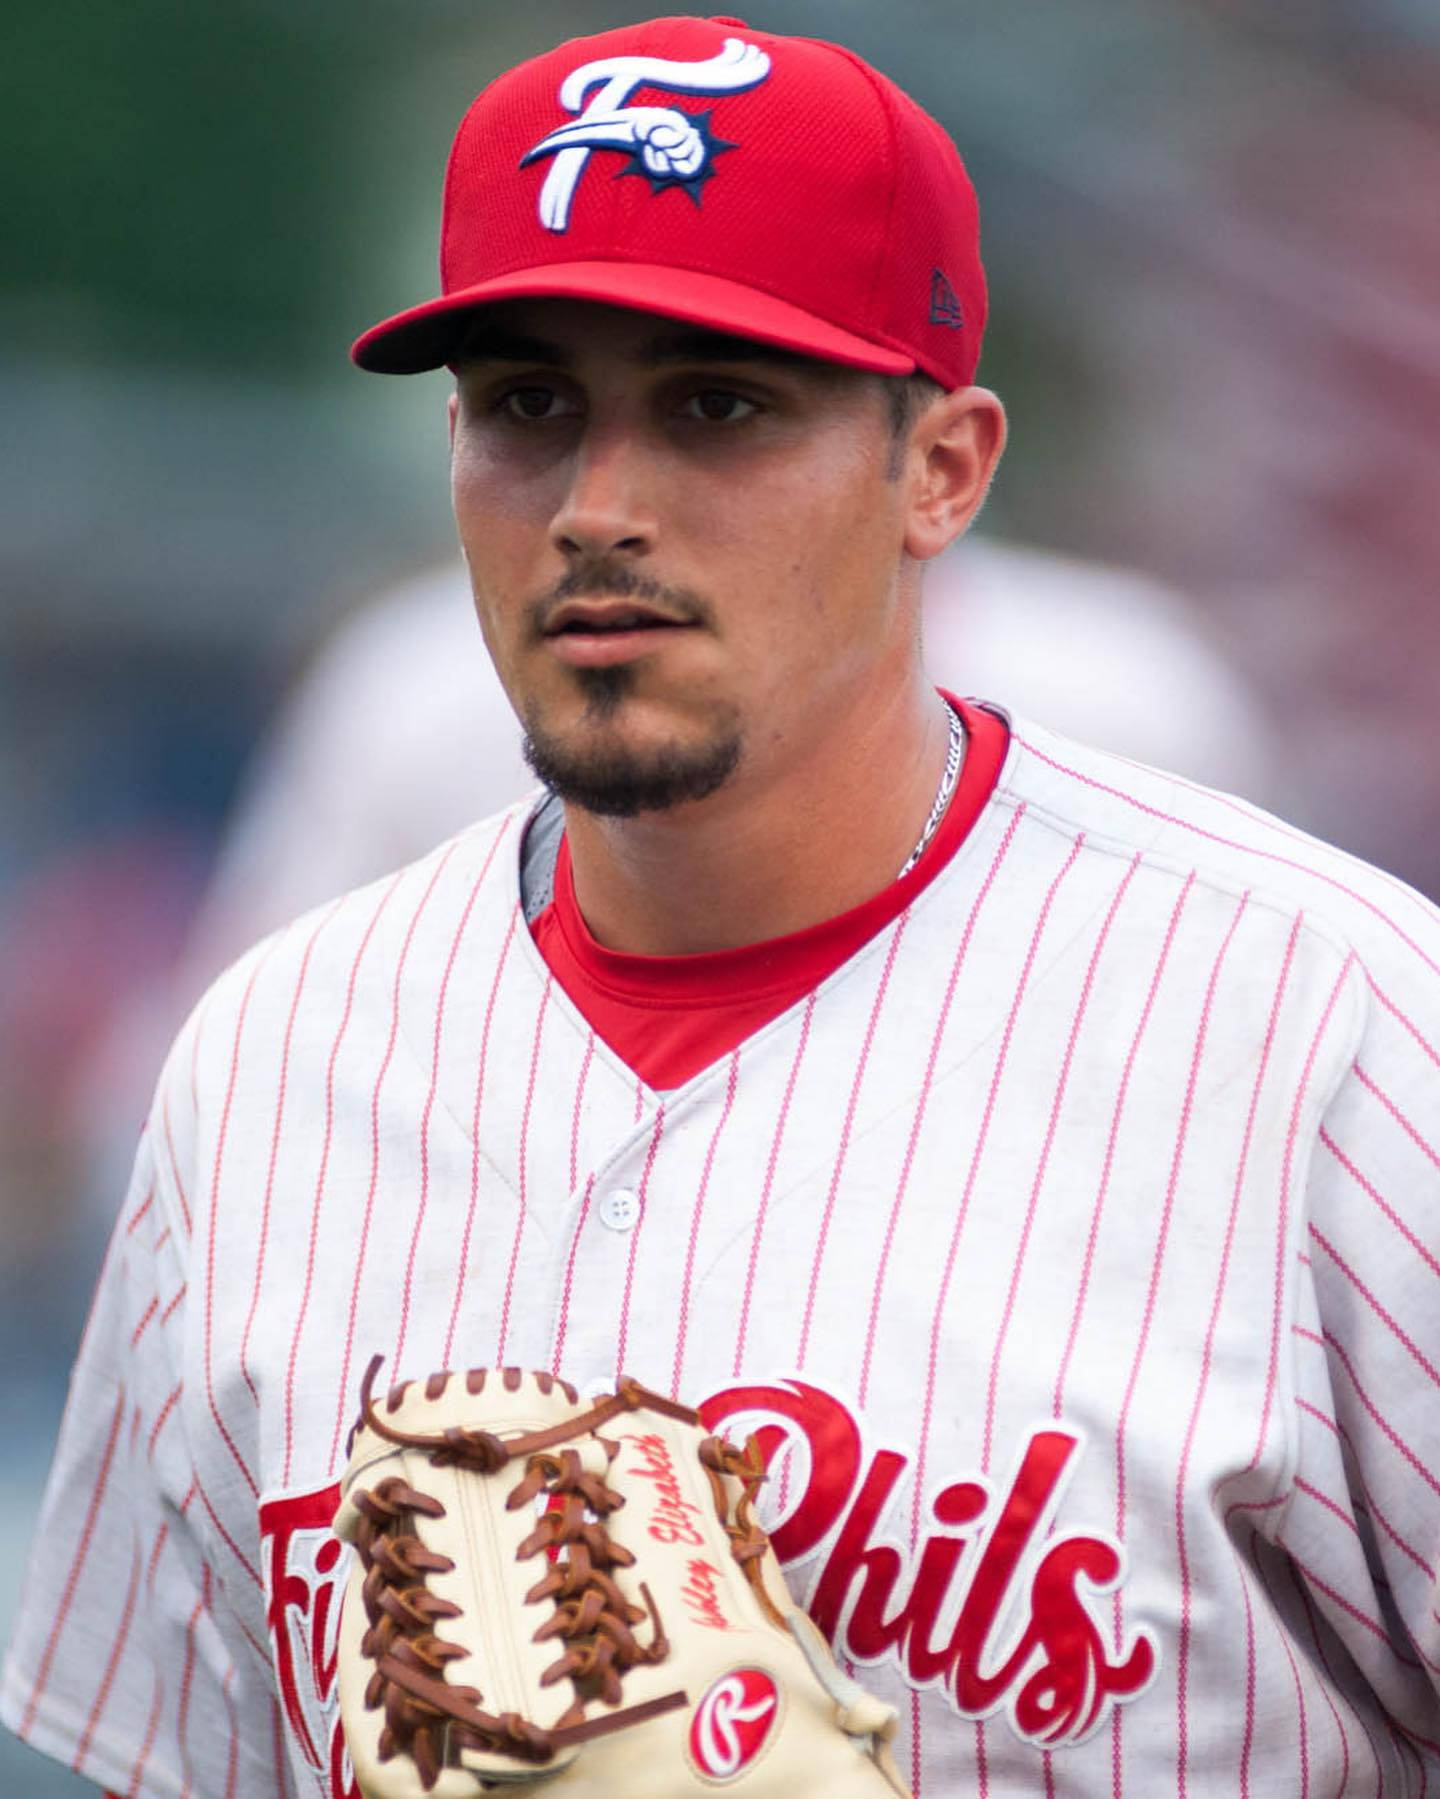 Zacheflin Ser Allvarlig Ut - This Could Be A Possible Translation For A Computer Or Mobile Wallpaper With A Serious Photo Of Zach Eflin, Perhaps In A Game Or Practice Setting. Wallpaper